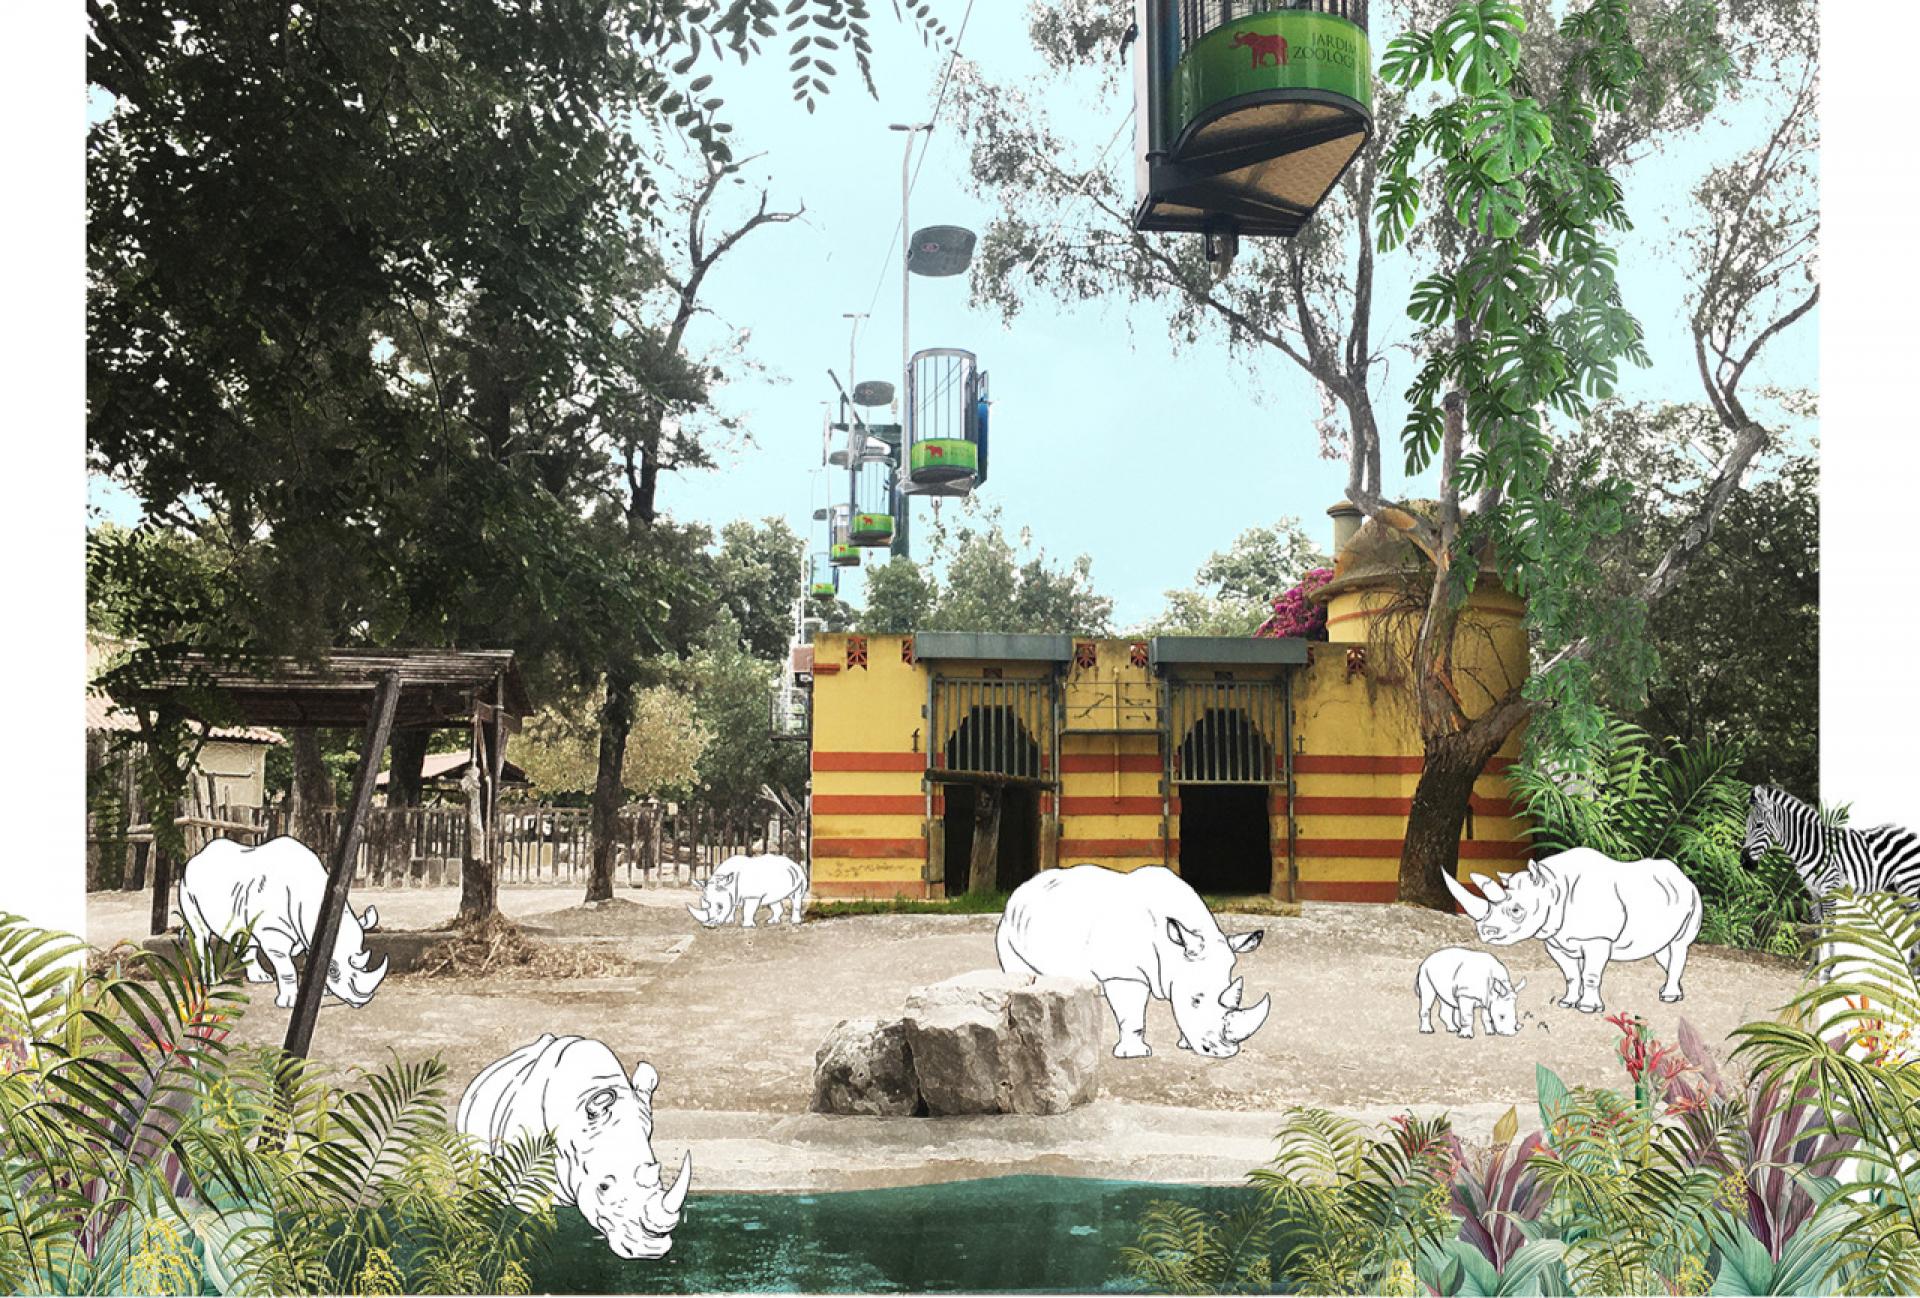 The Rhinoceros’ pavilion | Photo, illustration by the exhibition curatorial team